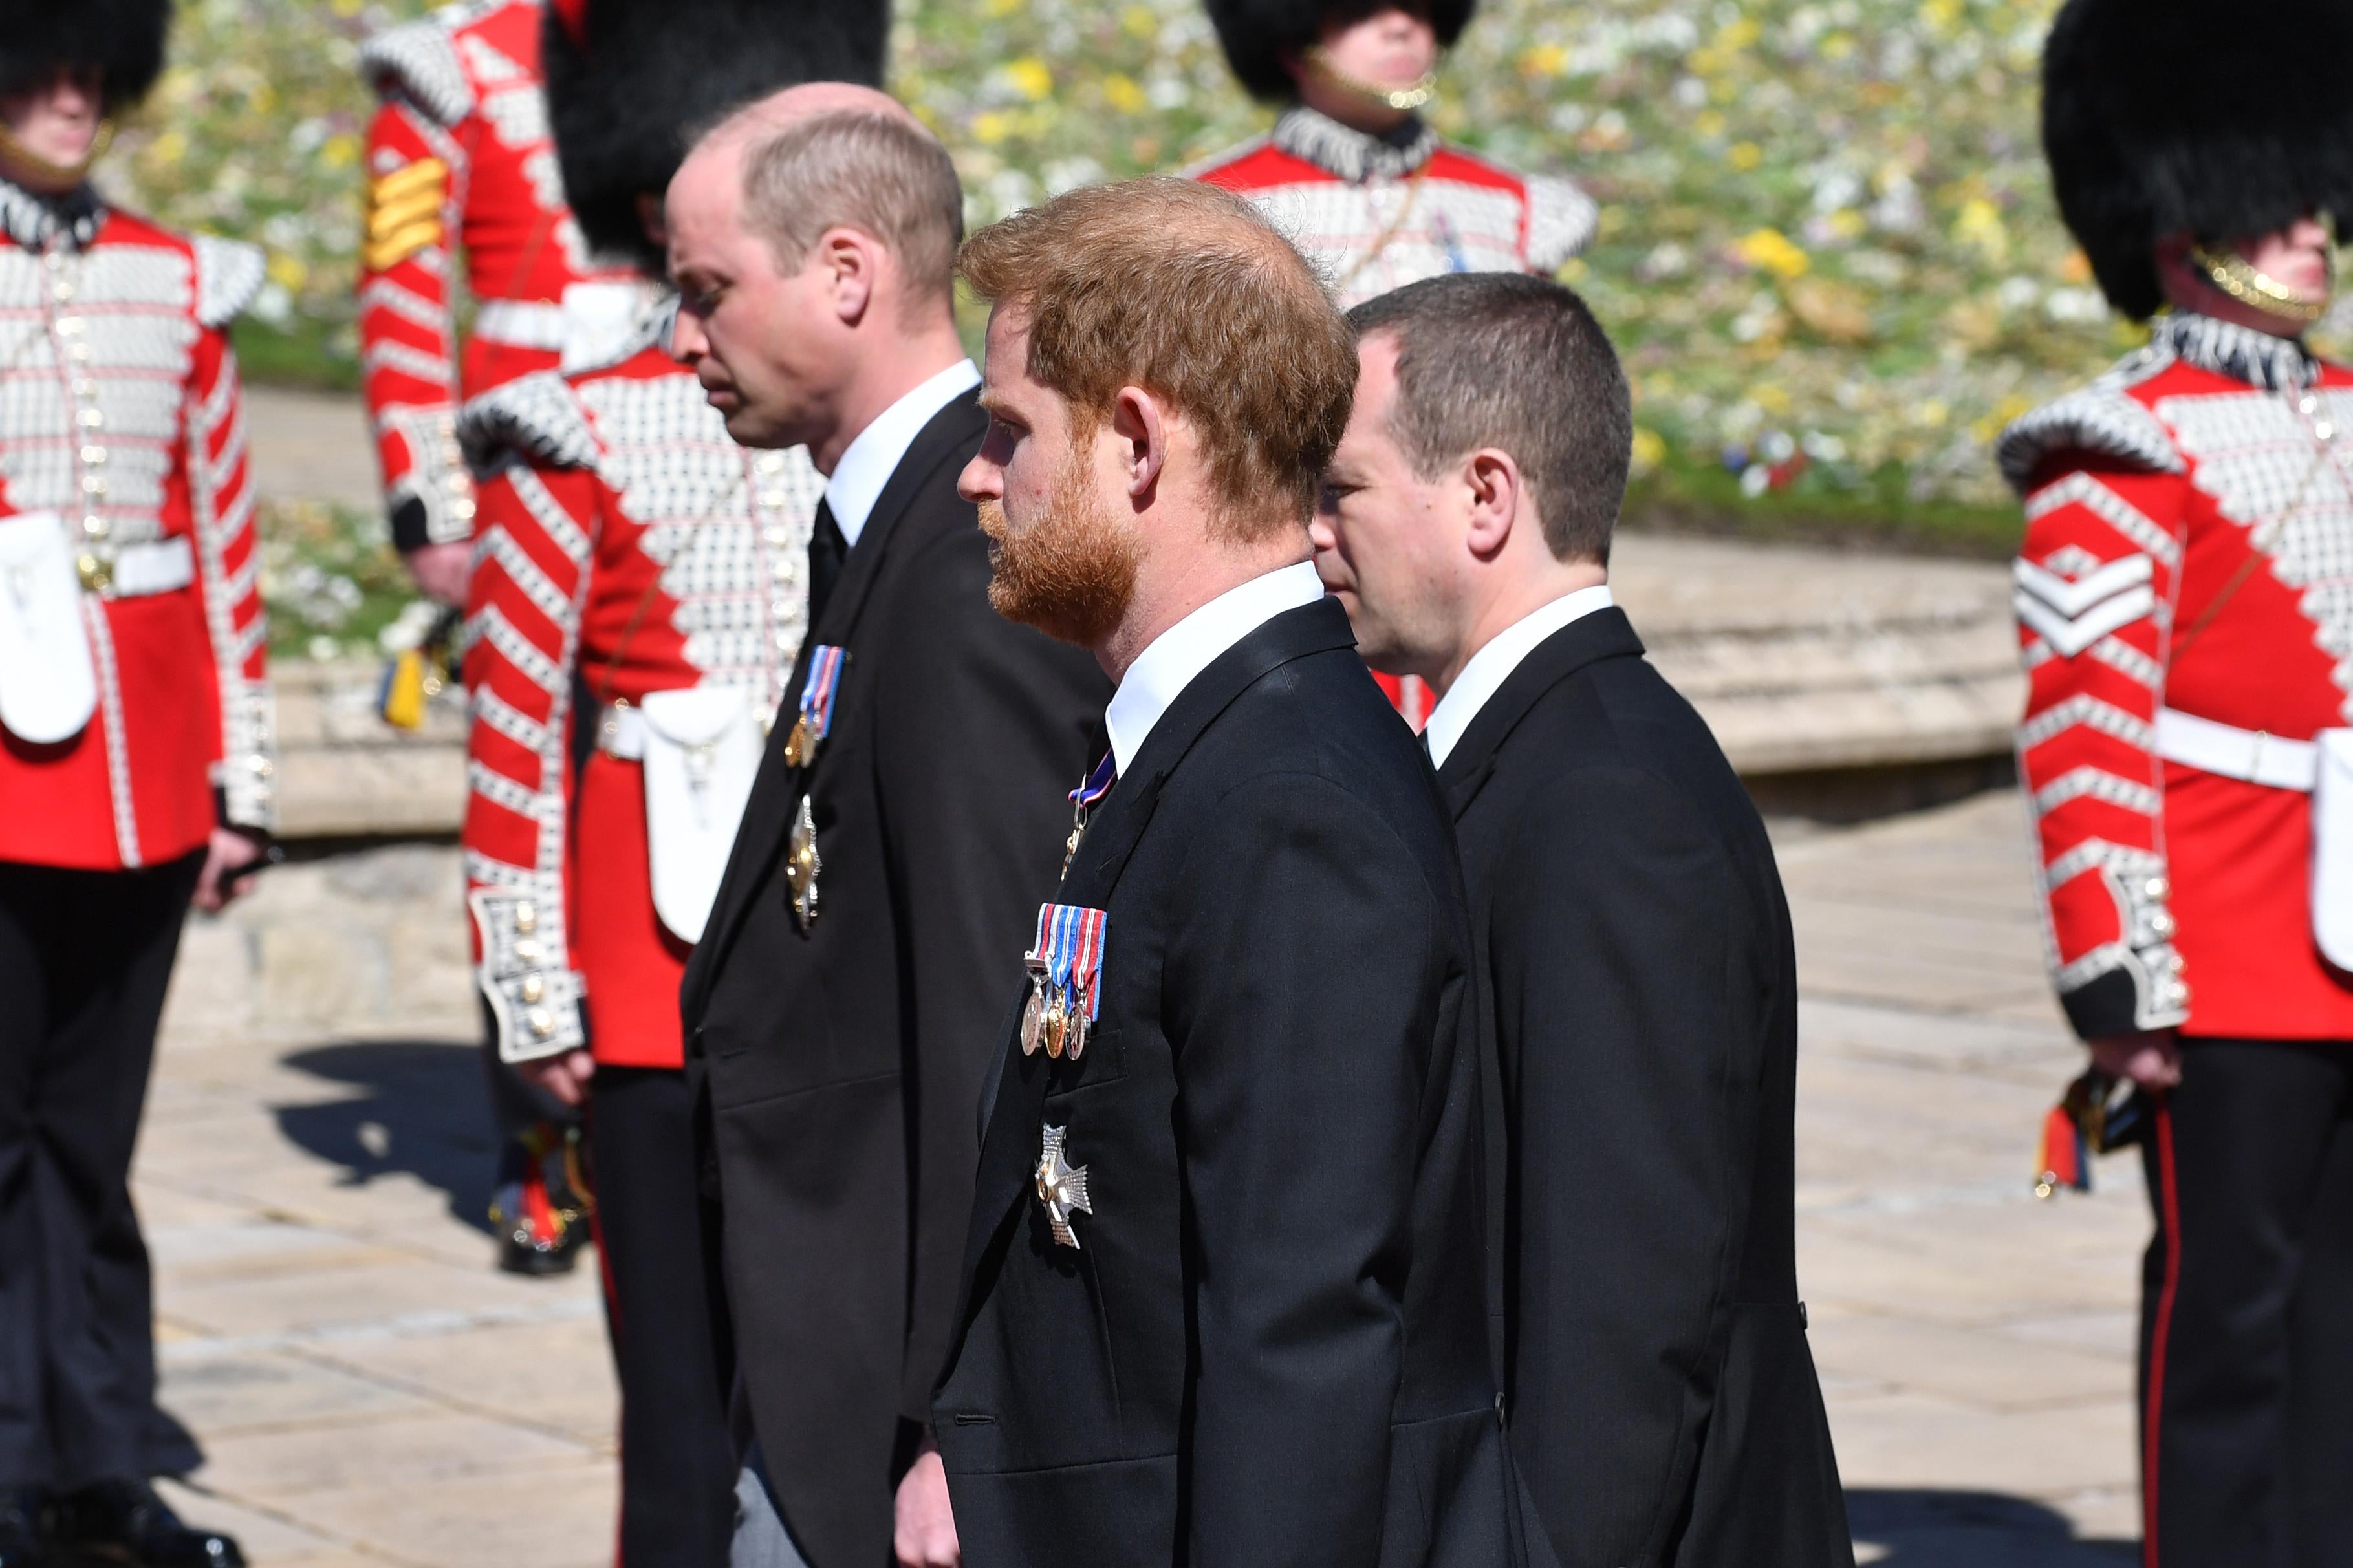 Prince William, Duke of Cambridge; Prince Harry, Duke of Sussex and Peter Phillips walk behind Prince Philip, Duke of Edinburgh's coffin in a procession during the funeral of Prince Philip, Duke of Edinburgh at Windsor Castle on April 17, 2021 in Windsor, United Kingdom. 